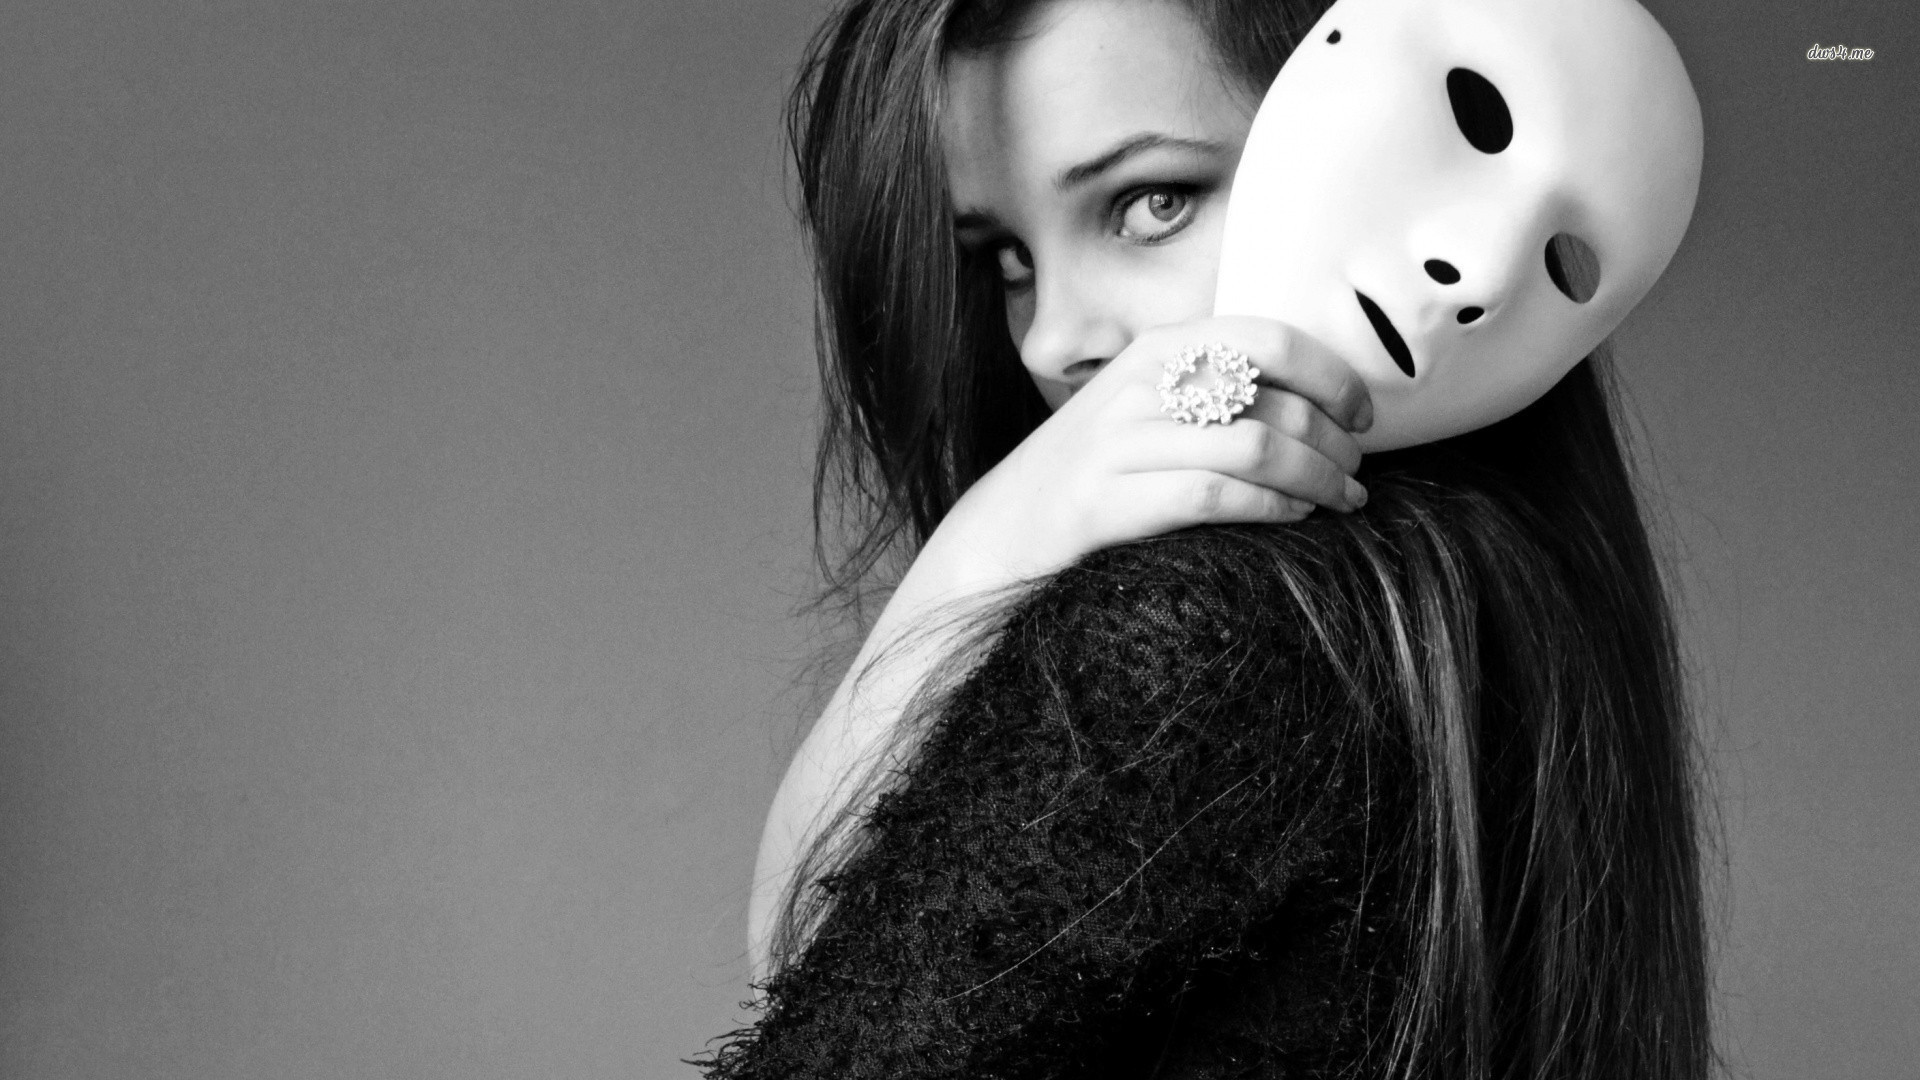 19160-girl-with-a-white-mask-1920x1080-photography-wallpaper.jpg